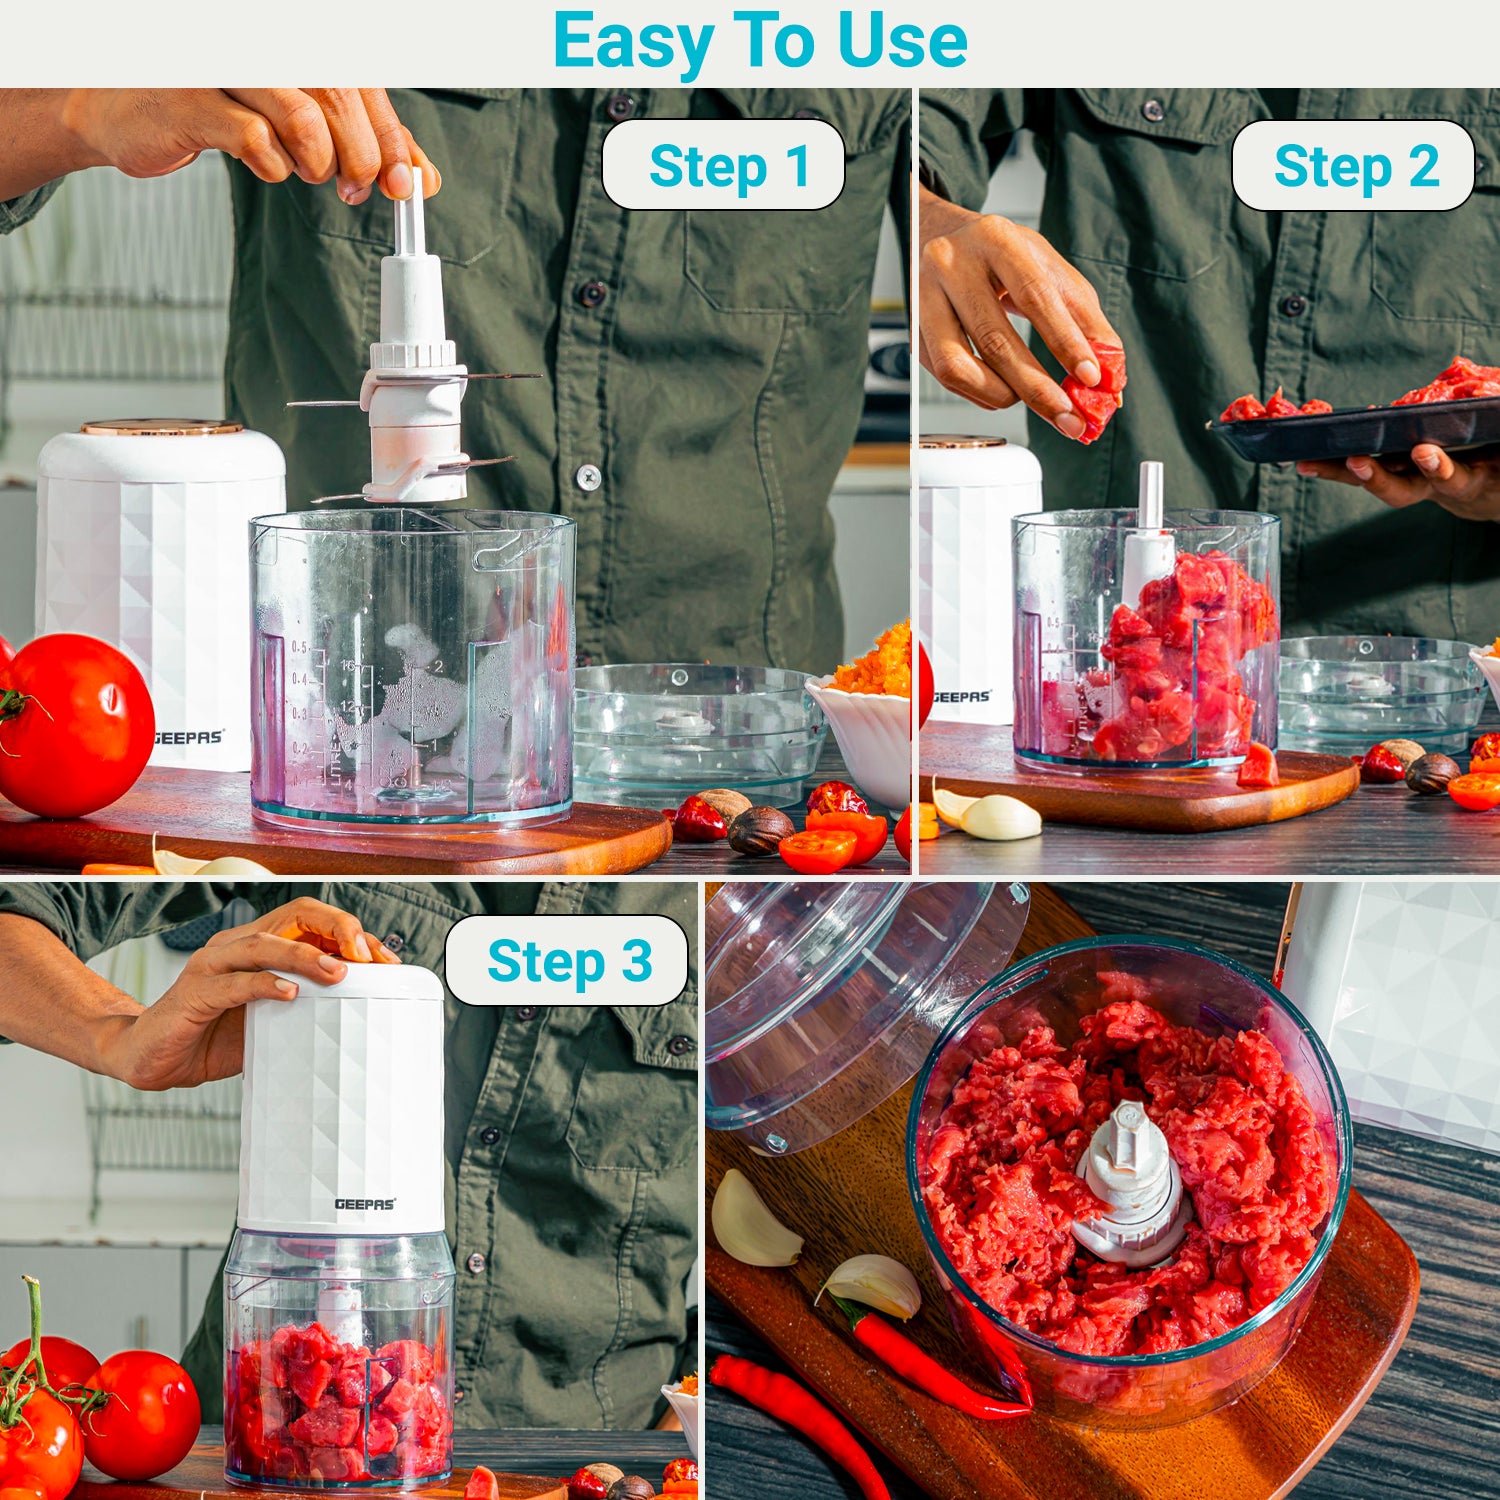 Geepas | For you. For life. 400W Mini Food Processor and Chopper Food Processor